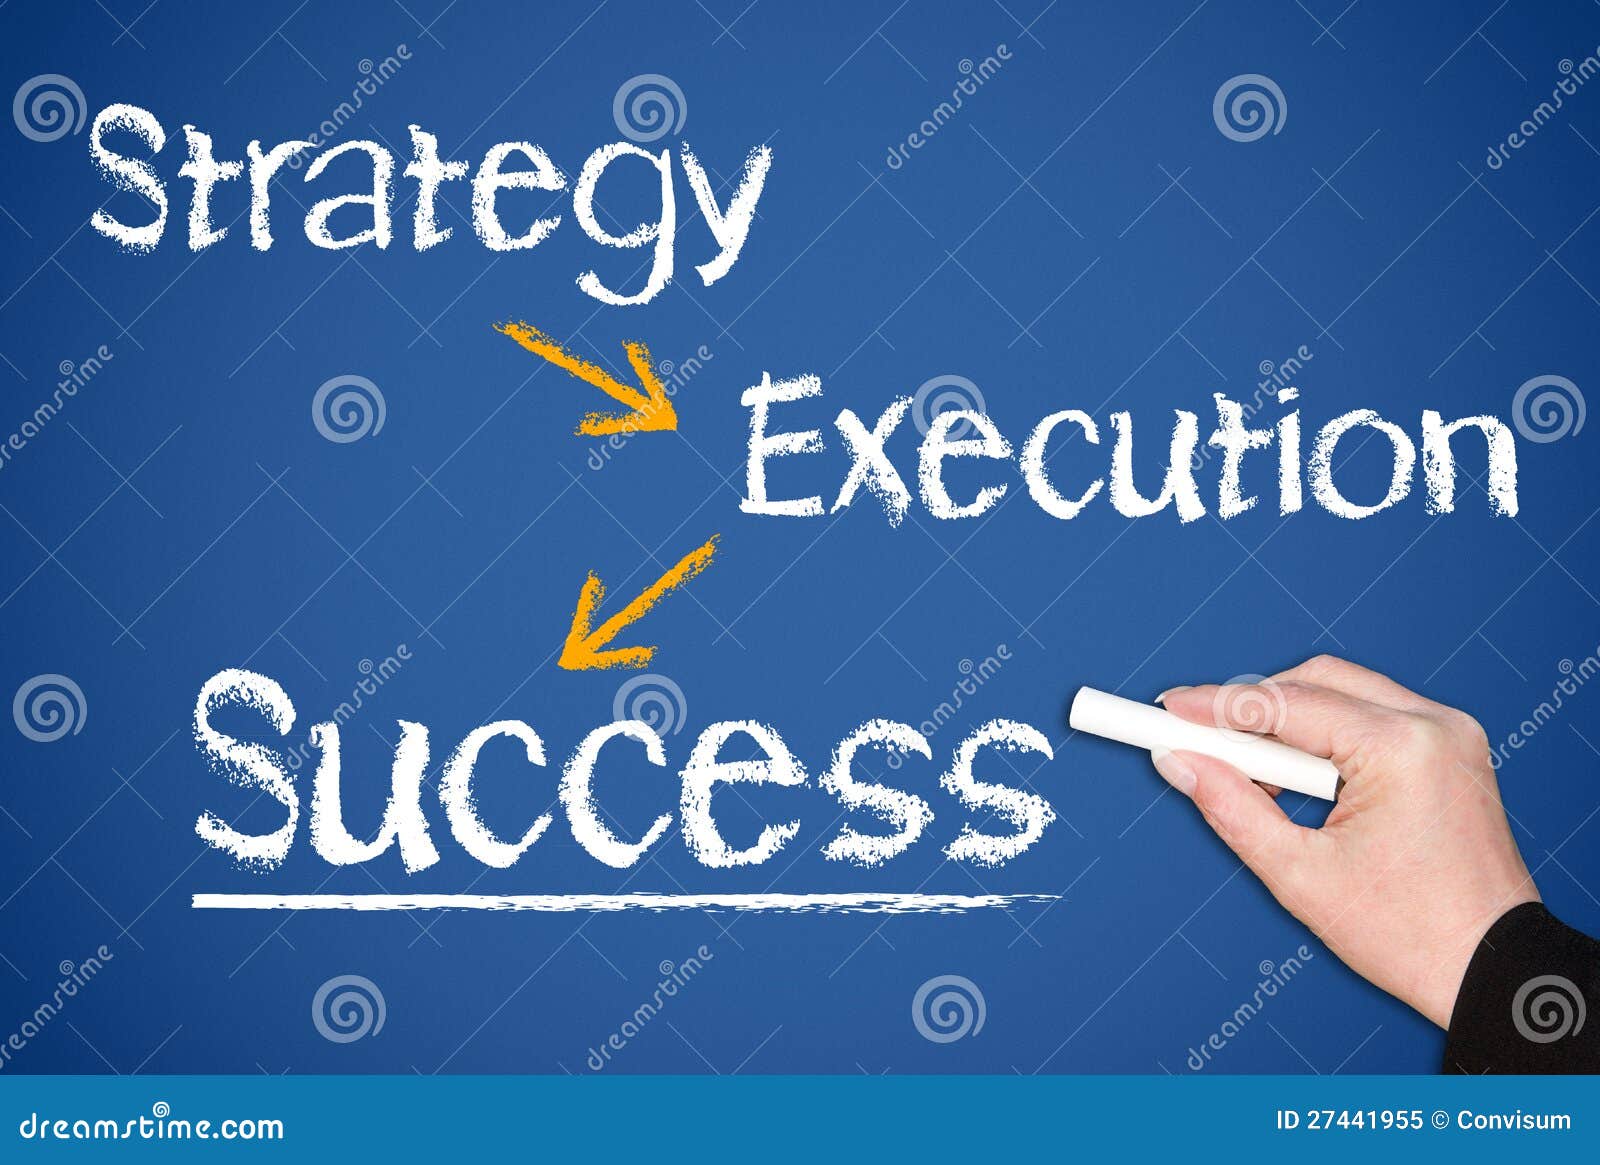 Business Planning To Achieve Success Stock Image Image Of Leadership